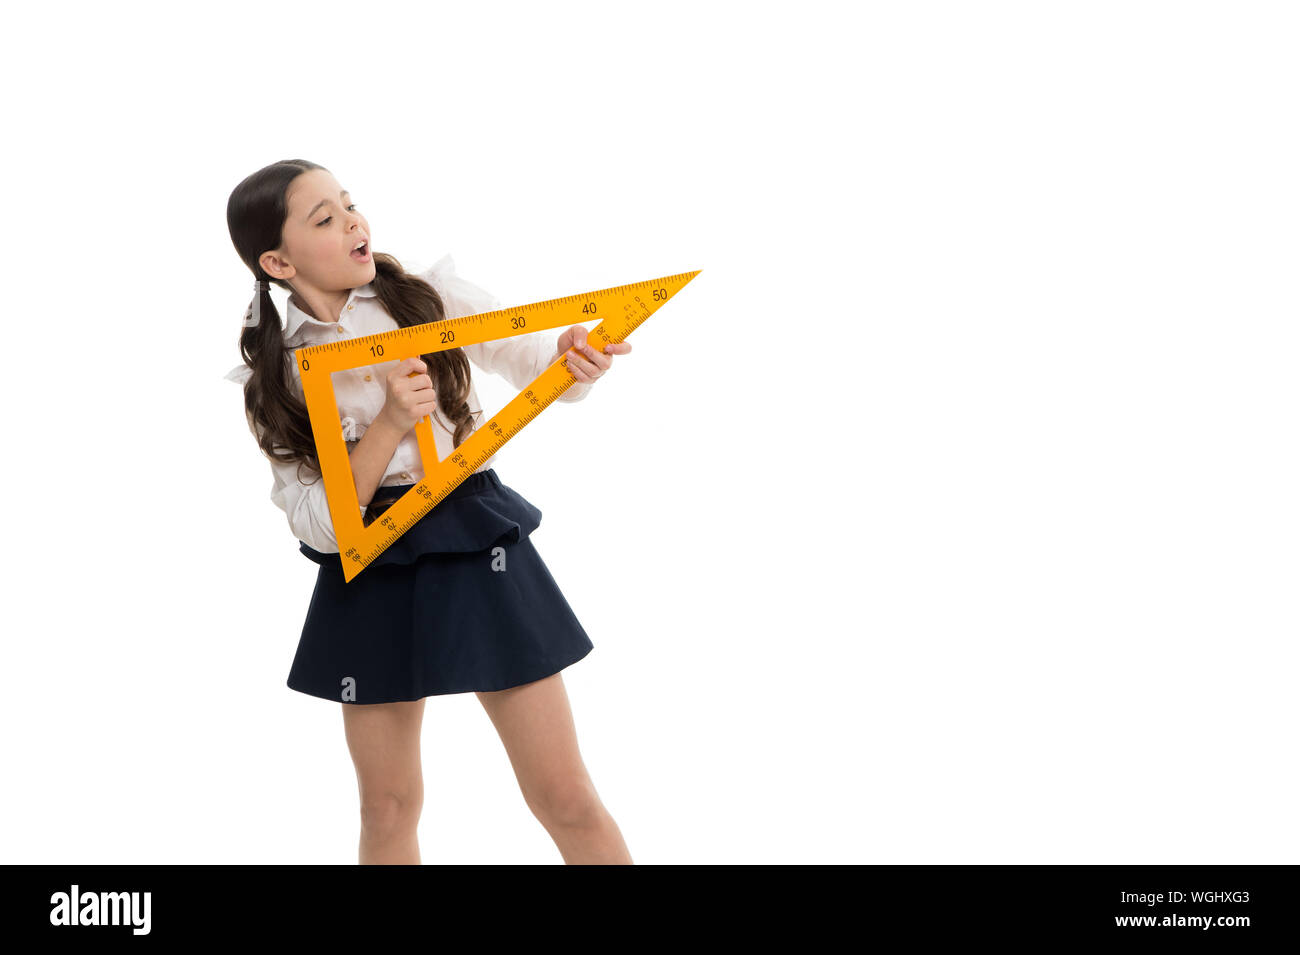 Education. Small child with measuring instrument at school lesson. Little girl preparing for geometry lesson. Cute schoolgirl hold triangular rulers for lesson. Stock Photo